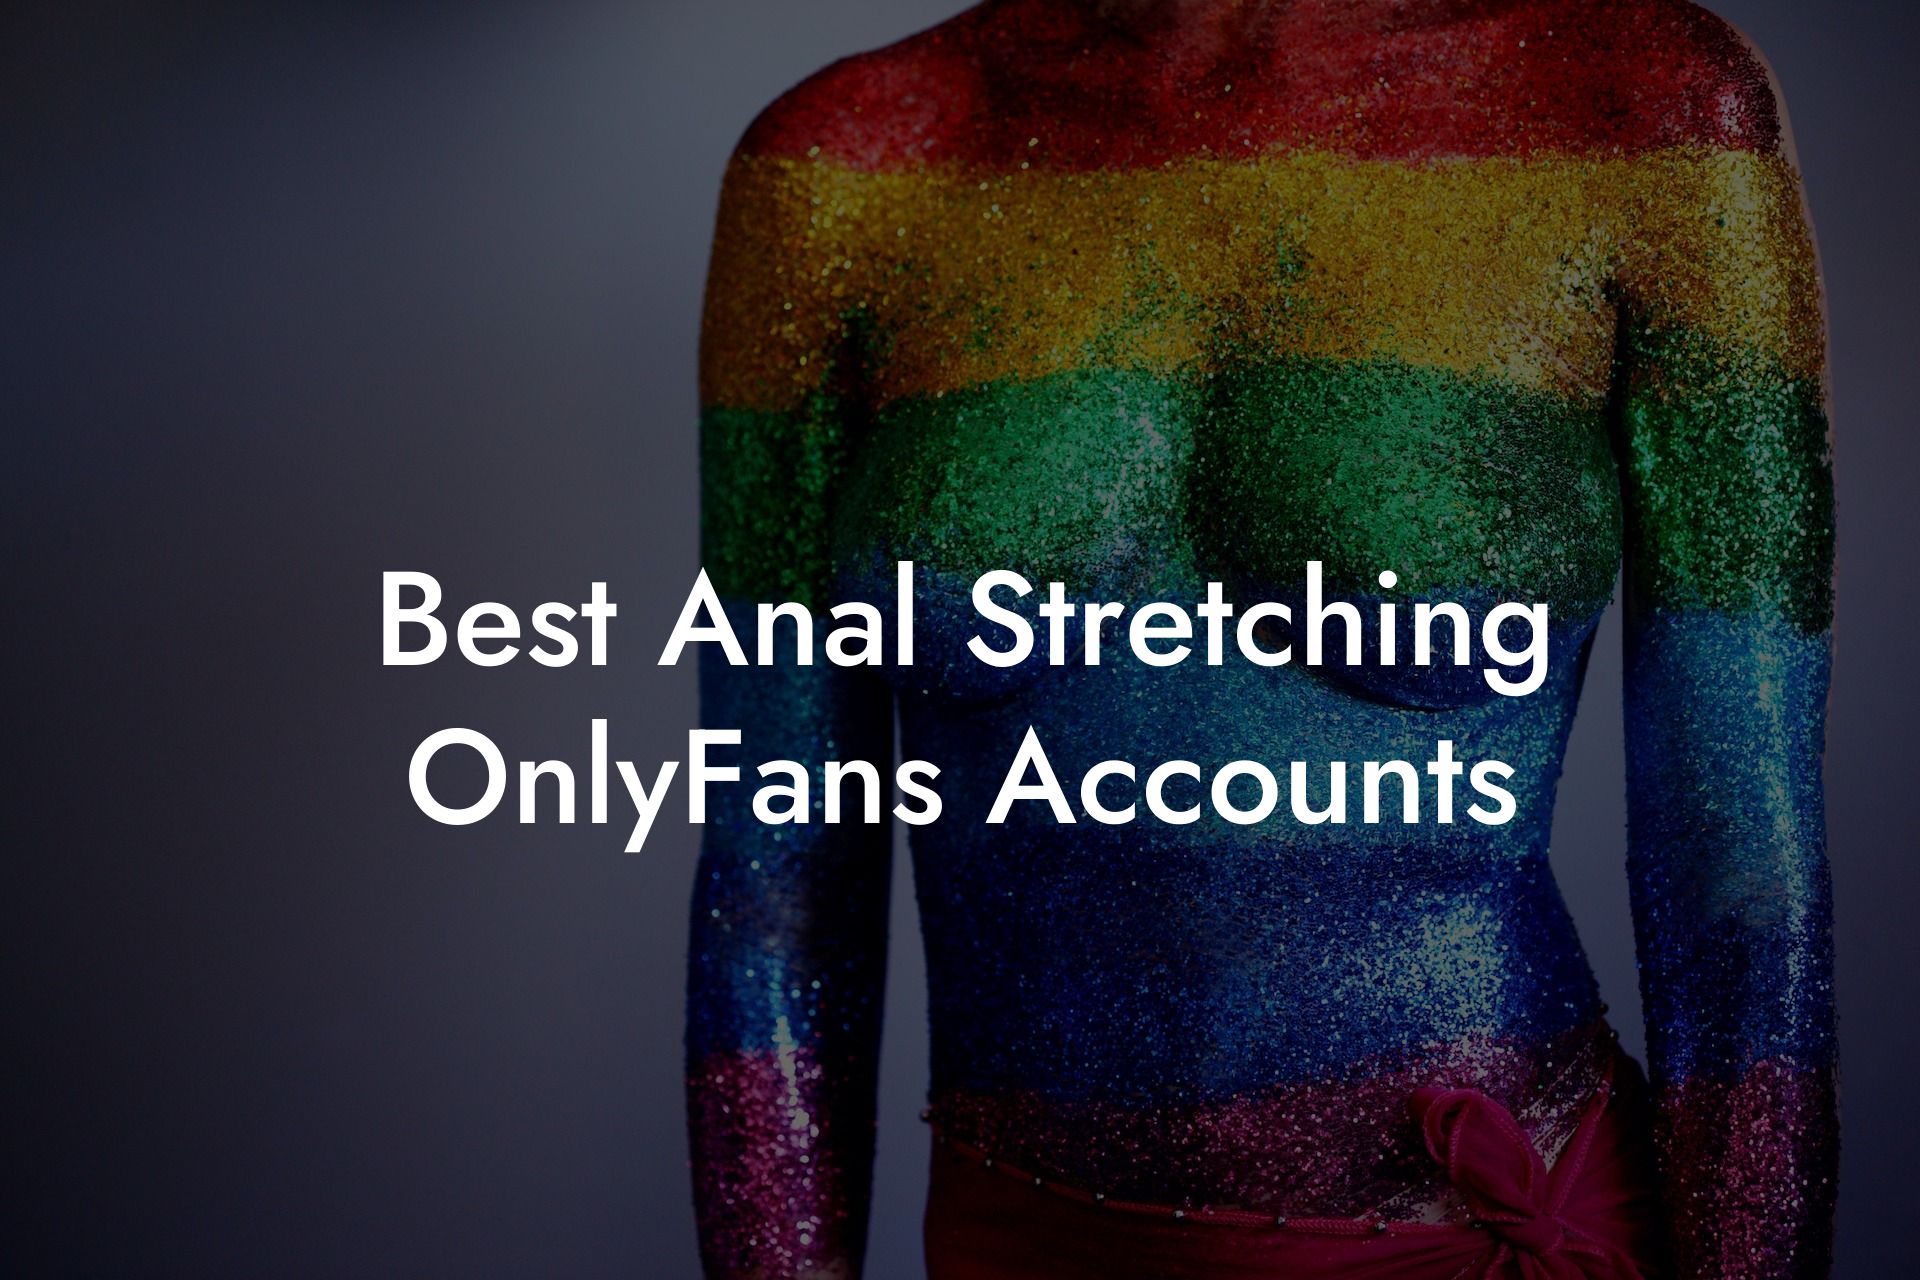 Best Anal Stretching OnlyFans Accounts